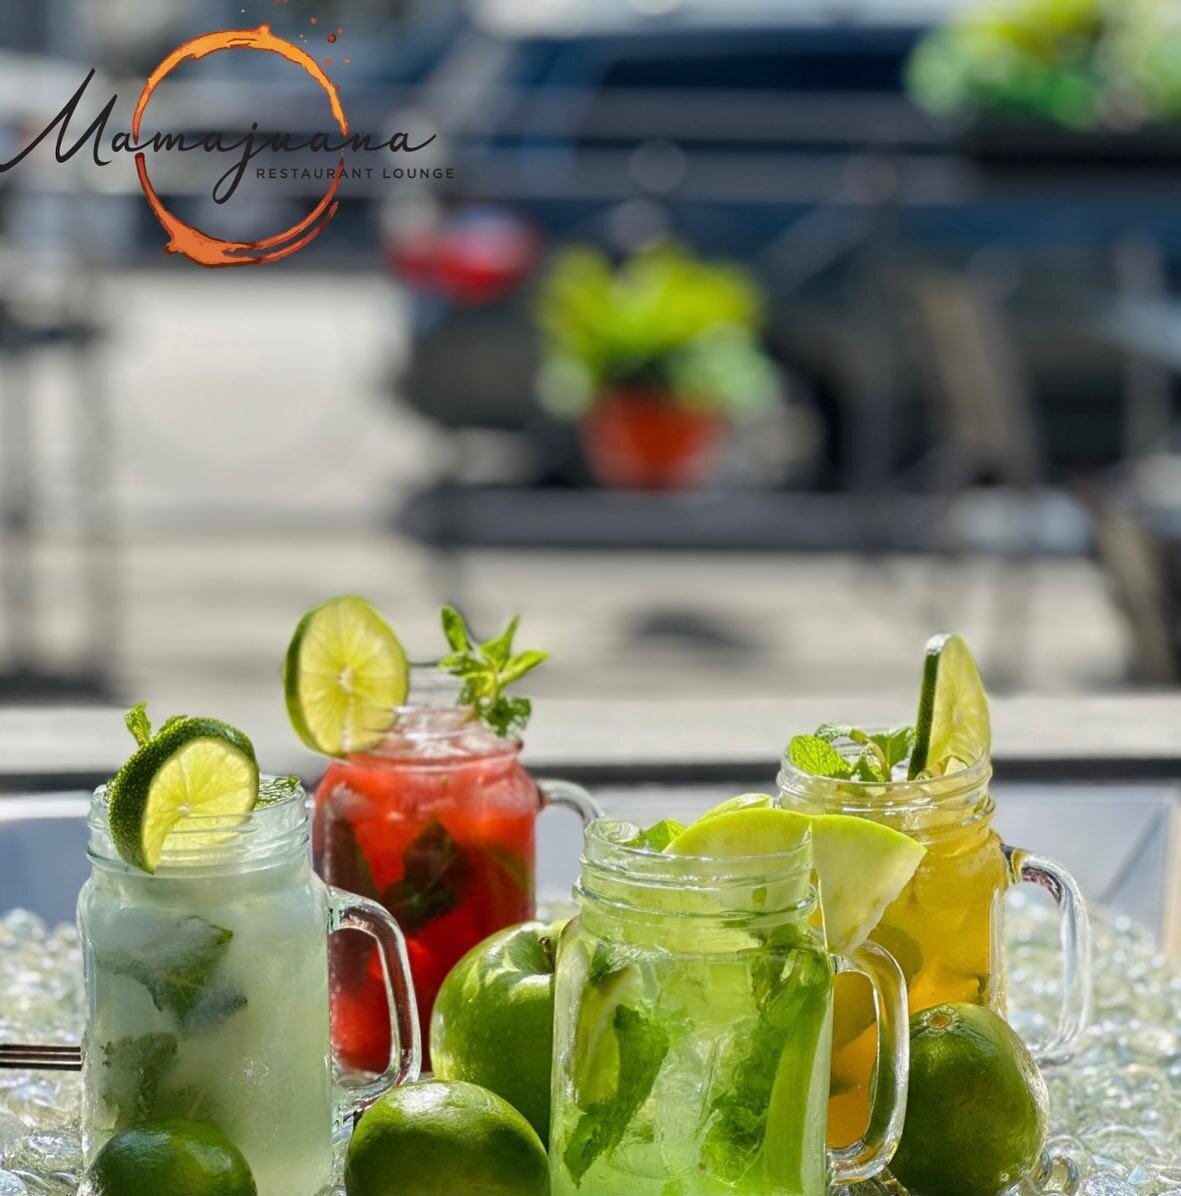 Happy Wednesday!🤩

Come and join us today for our Mojitos 2x1 special. ☀️

#summer #mojitos #drinks #mamajuana #mamajuanarestaurant #mamajuanarestaurantlounge